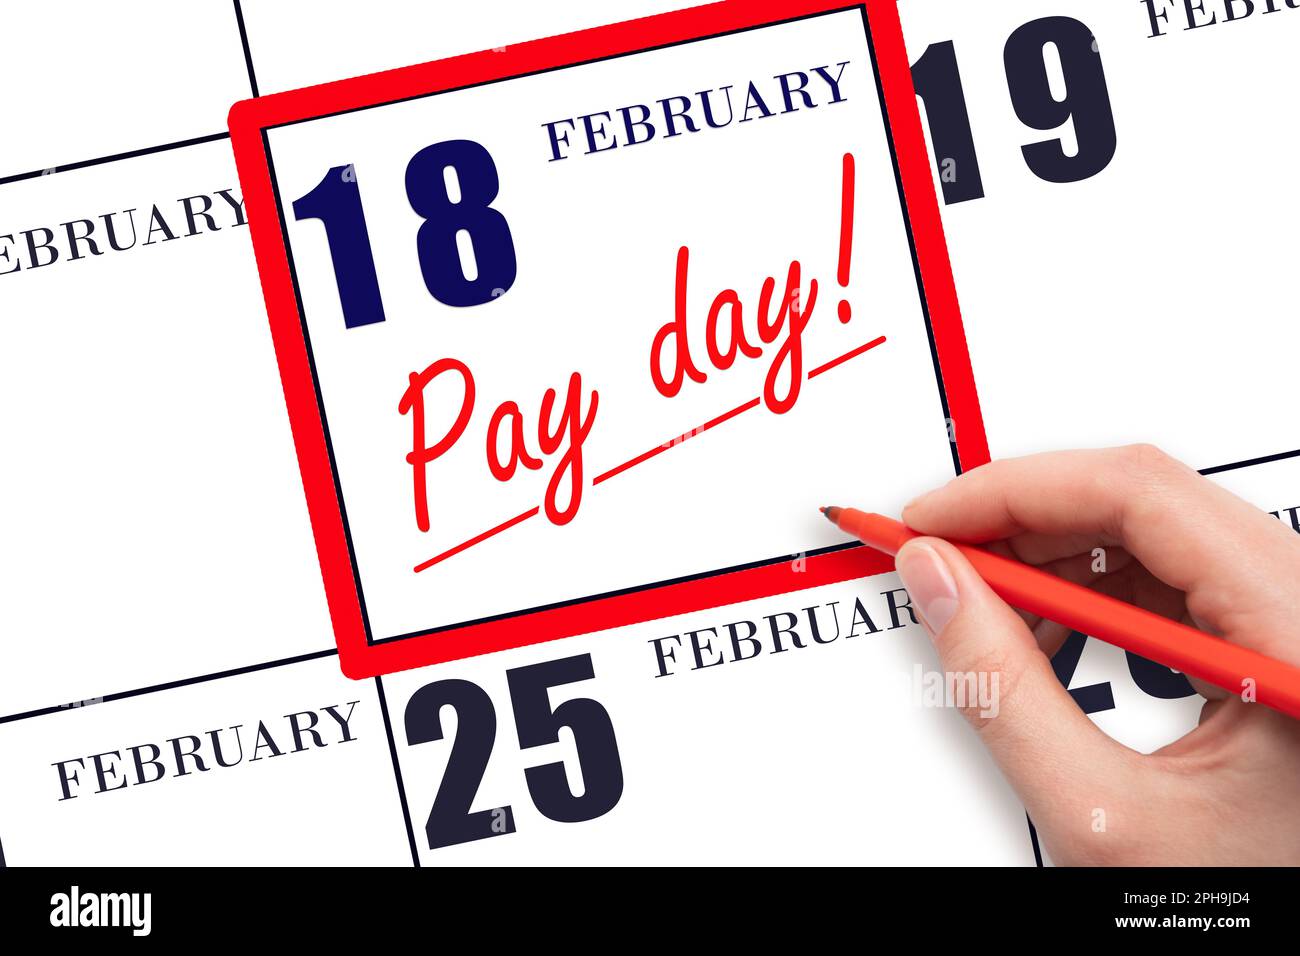 18th day of February. Hand writing text PAY DATE on calendar date February 18 and underline it. Payment due date.  Reminder concept of payment. Winter Stock Photo